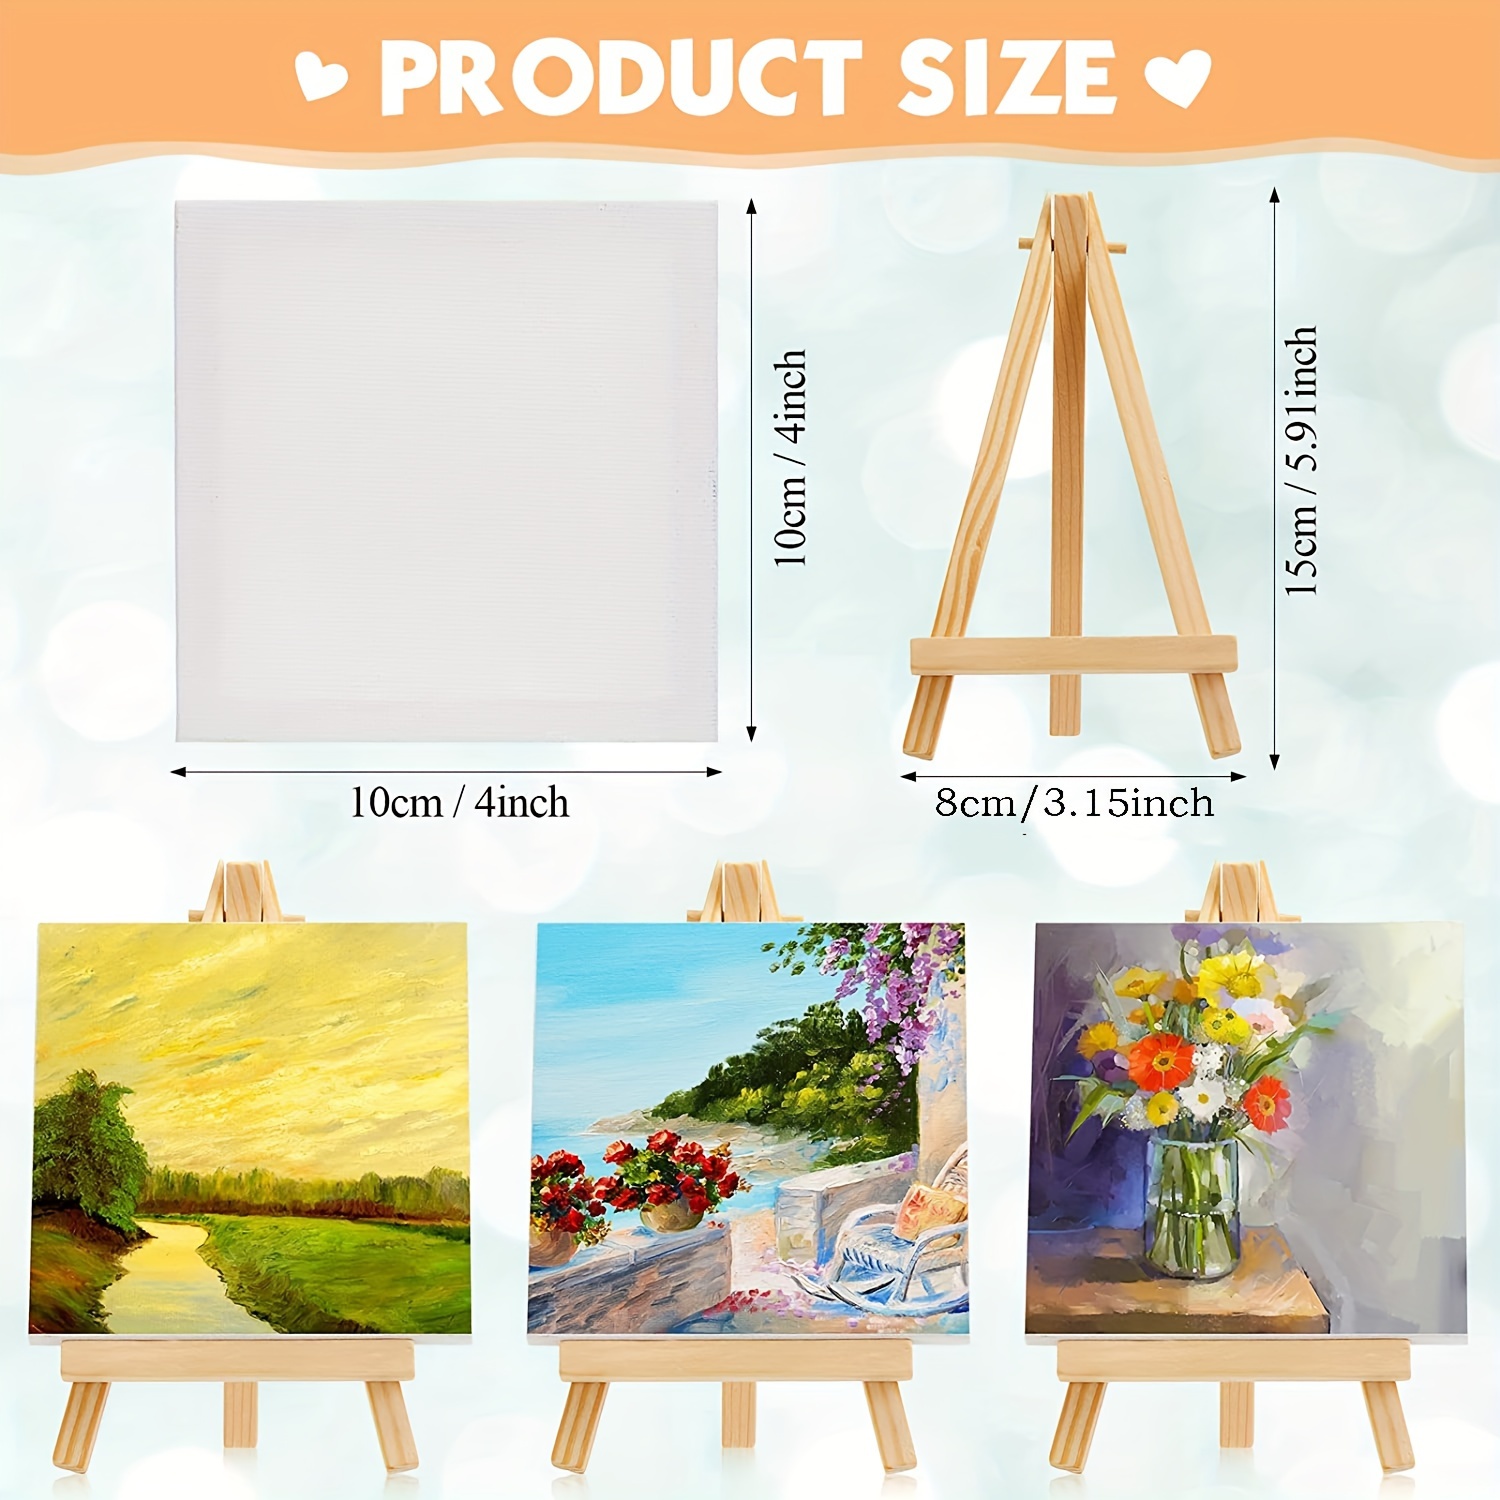 8 pack 4inx 4in mini canvas and easel set small art easel stand with canvas set tabletop wooden display stand and canvas panels for artist adults painting